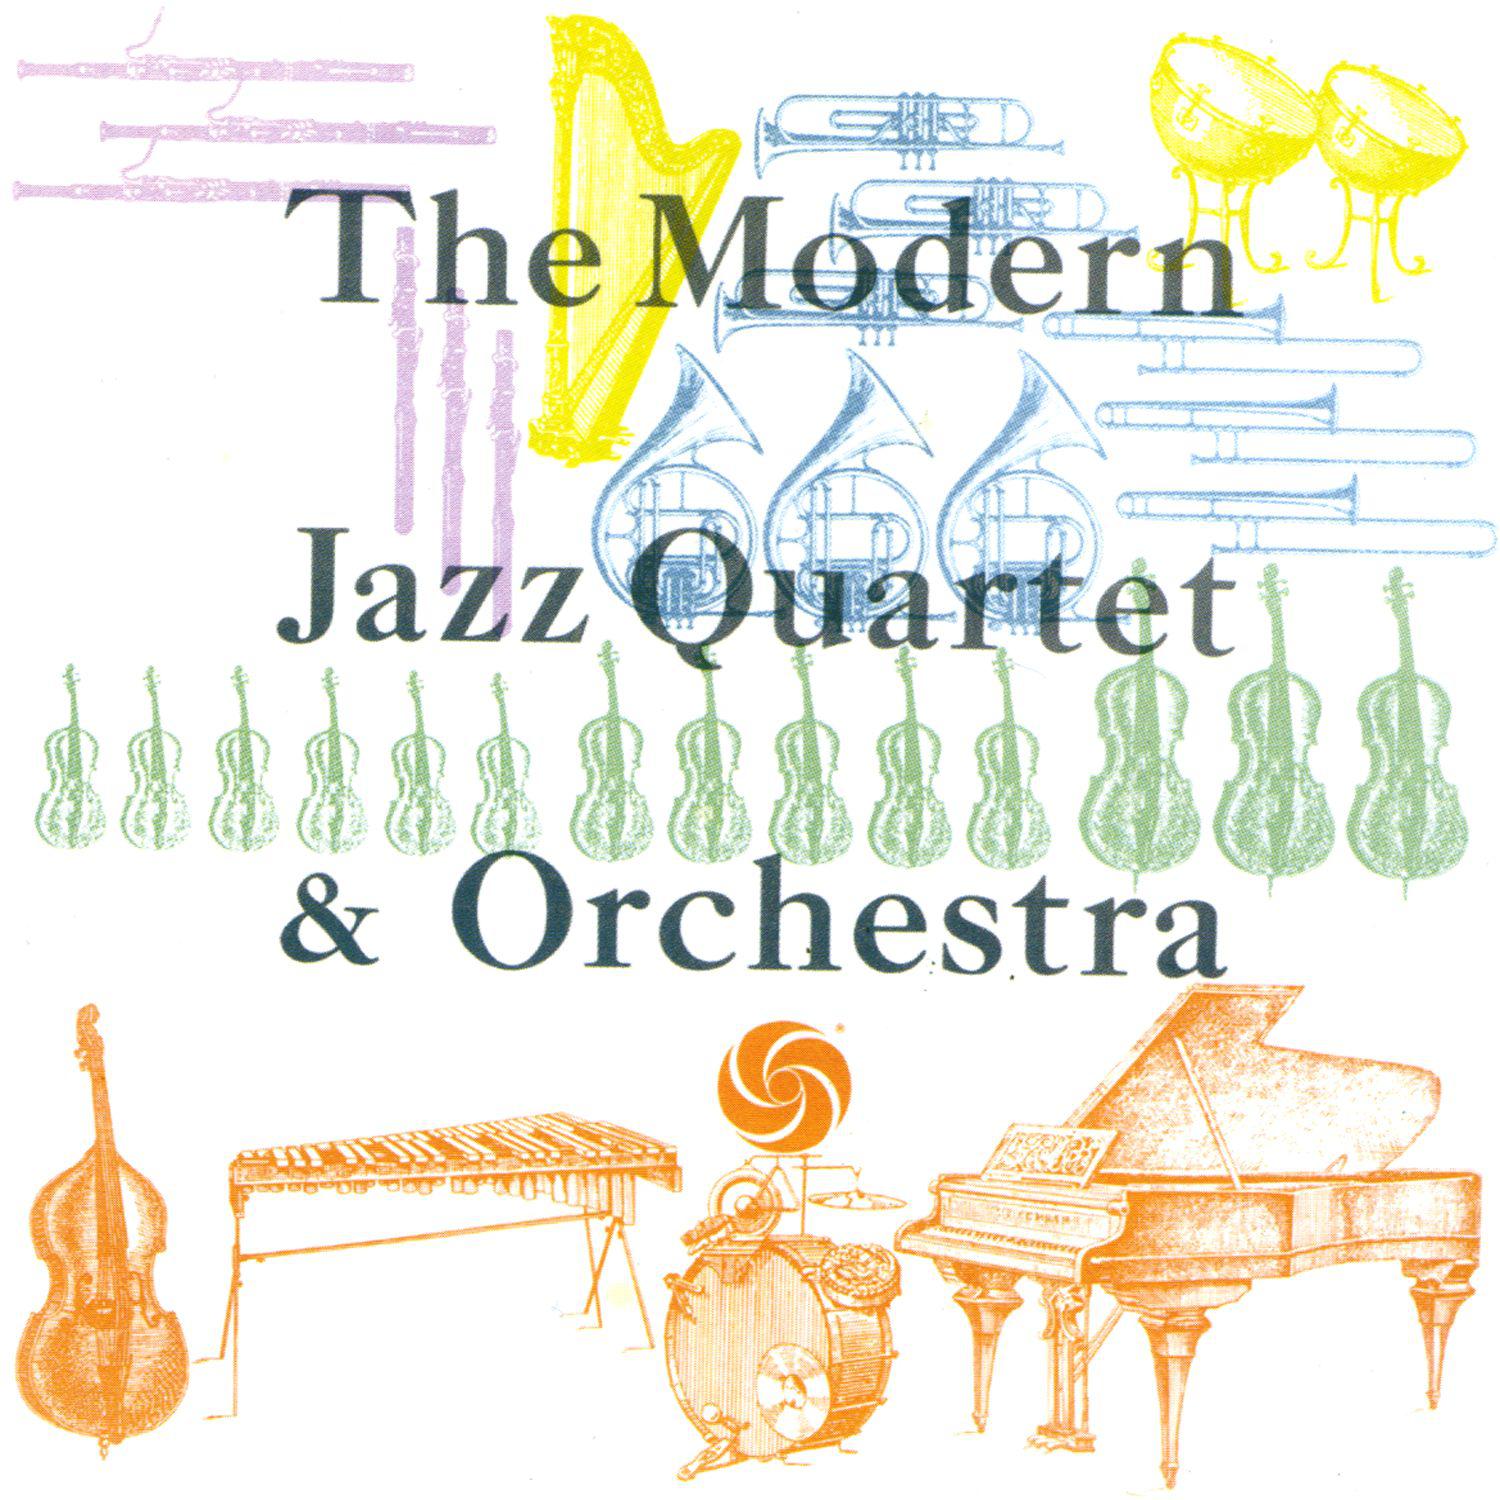 Concertino for Jazz Quartet and Orchestra: Third Movement